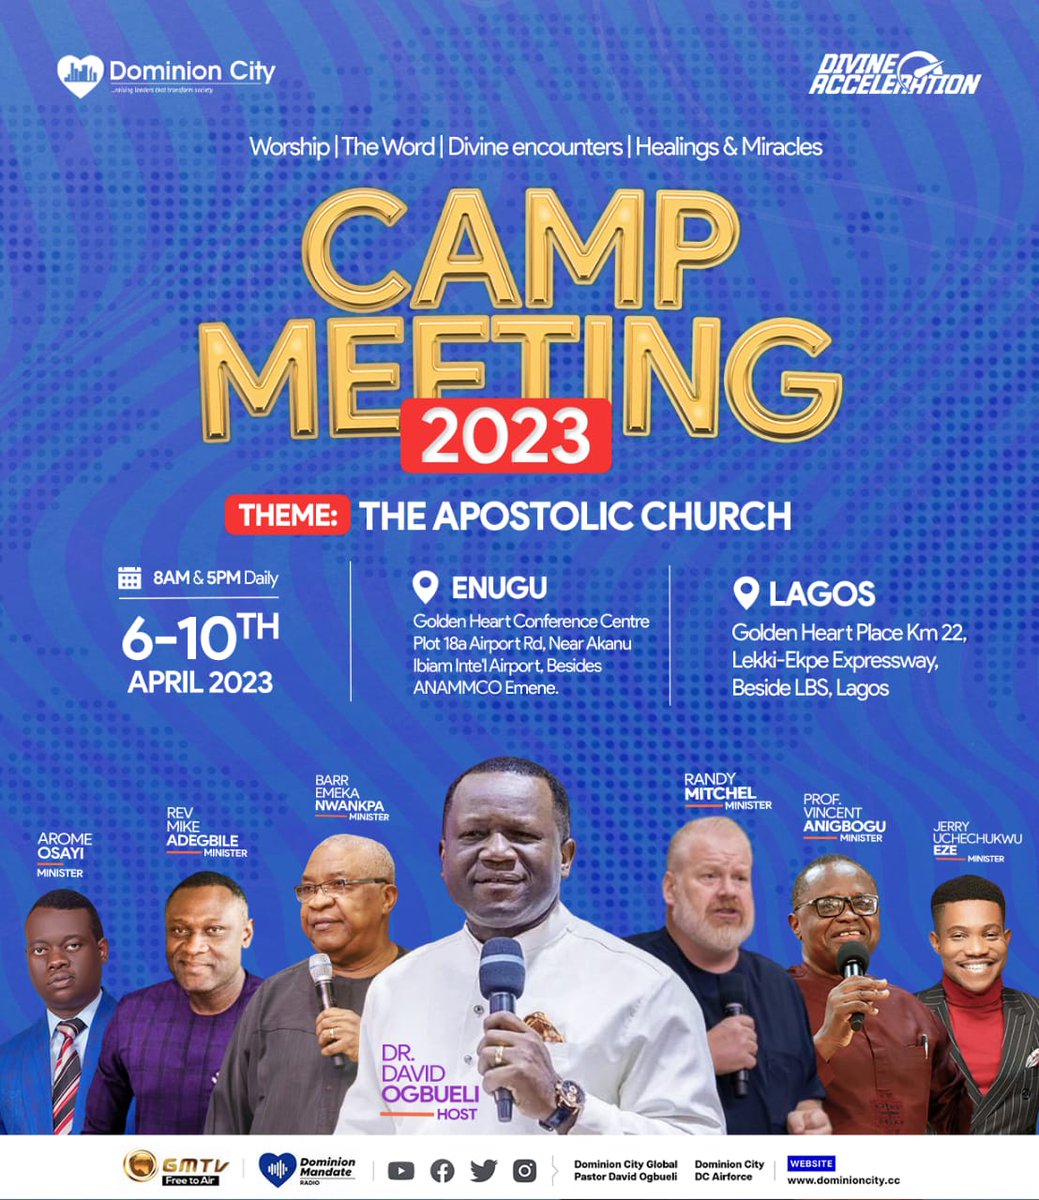 And 2023 Dominion City camp meeting is here‼️

#campmeeting 
#PastorDavidOgbueli 
#campmeeting2023